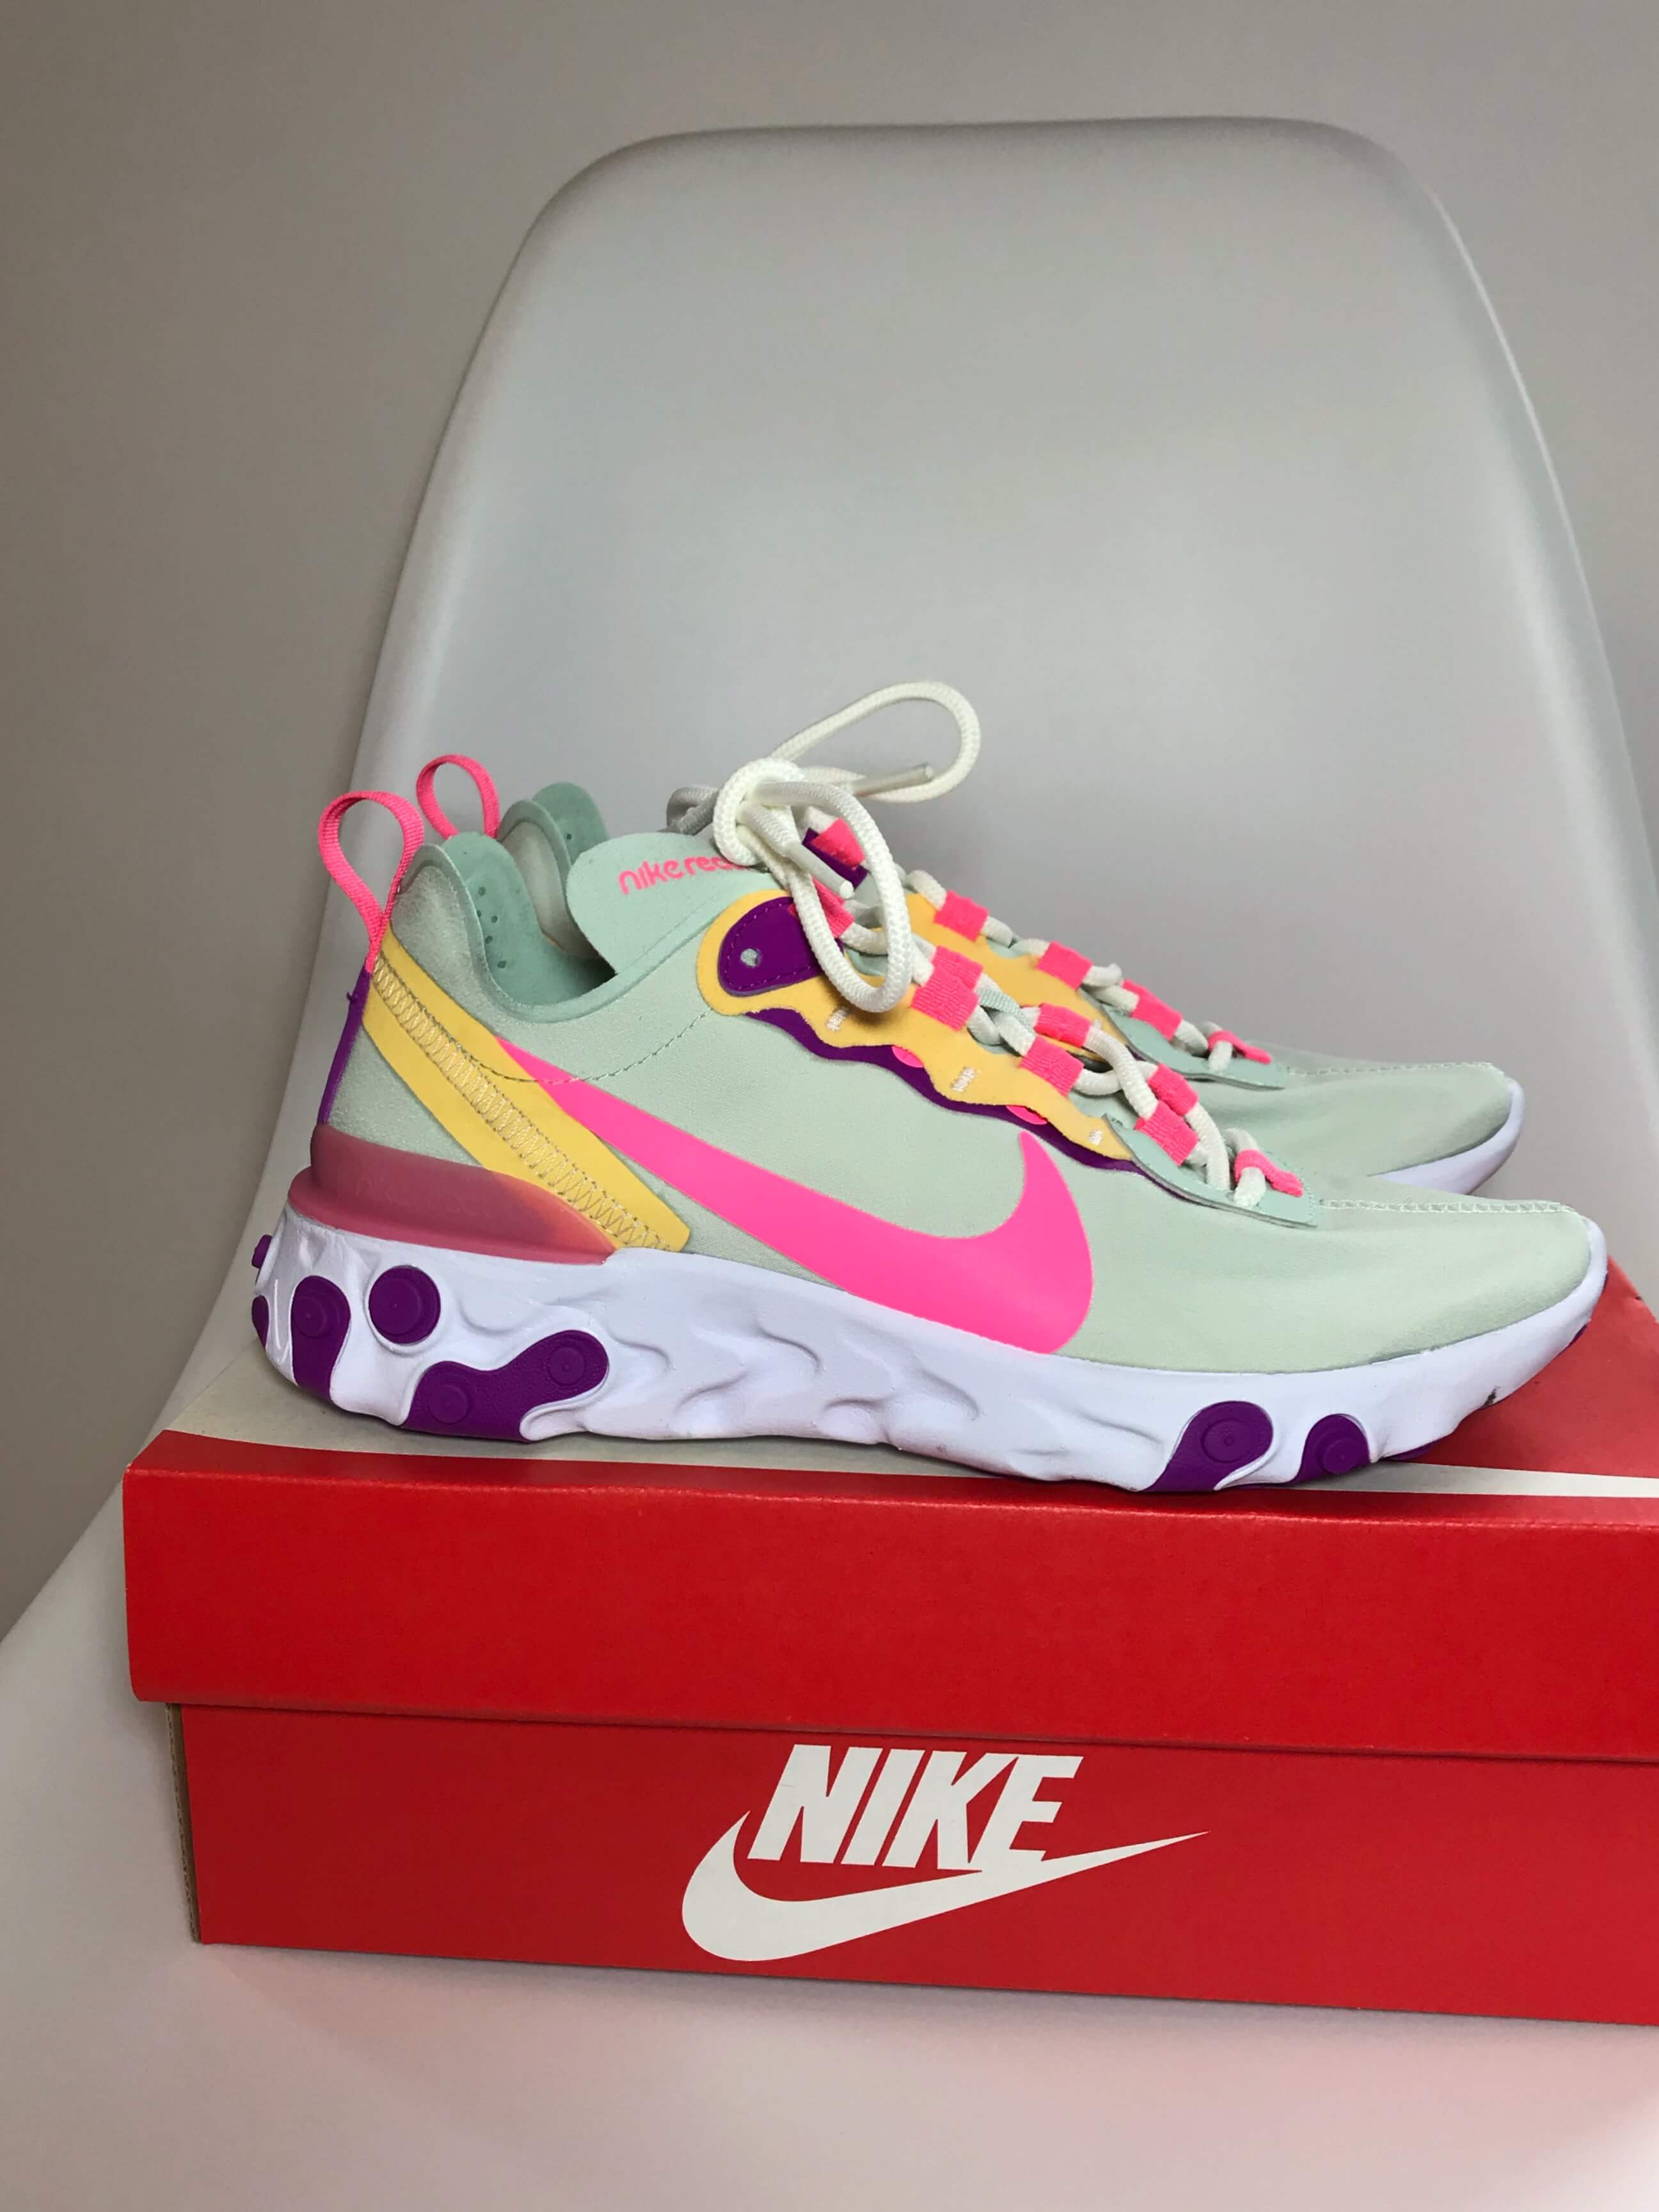 camarera Escándalo Retener 🥇 NIKE React Element 55 COLORES espectaculares++SÚPER TOP++ |  ungdomsysneakers.com | pack on Nike iD great colourways and tons of fun